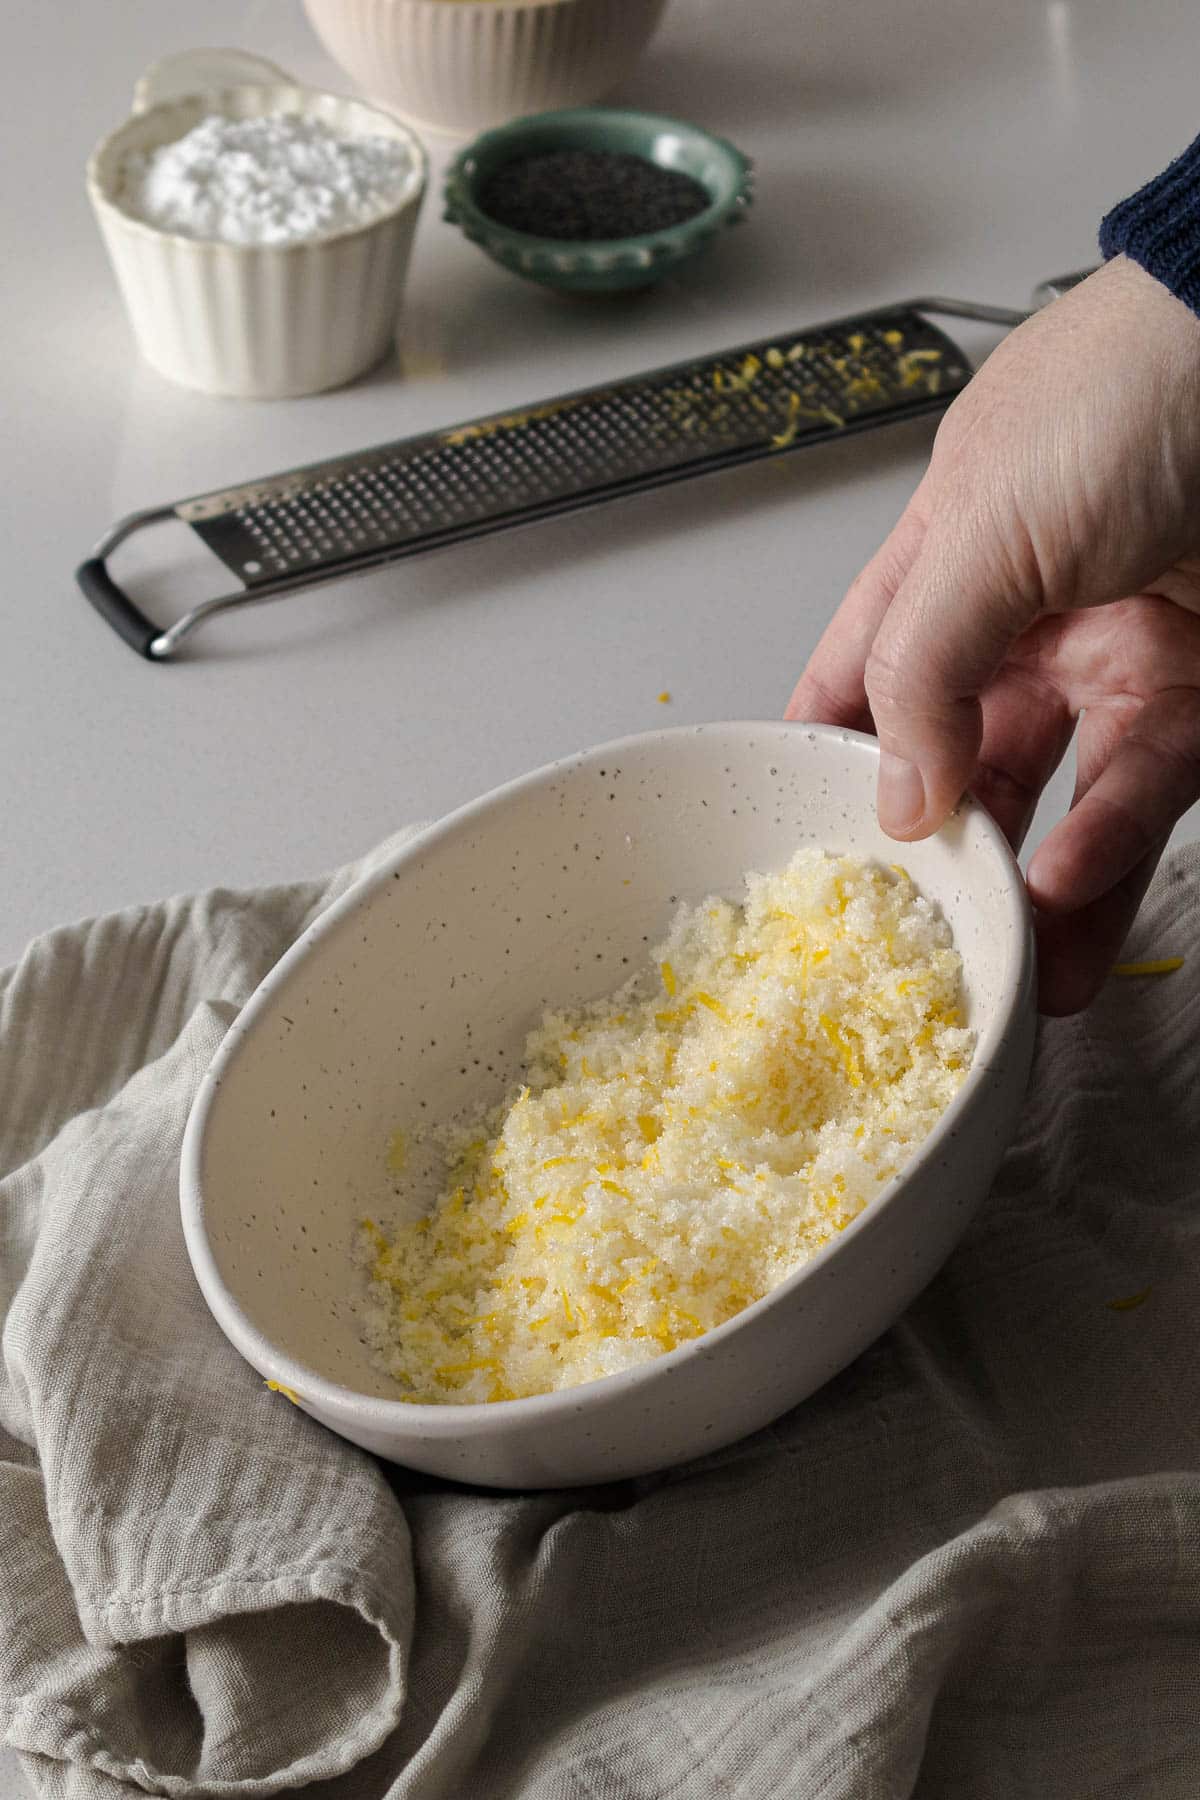 Step 3 - Lemon zest rubbed into the sugar in a small bowl.